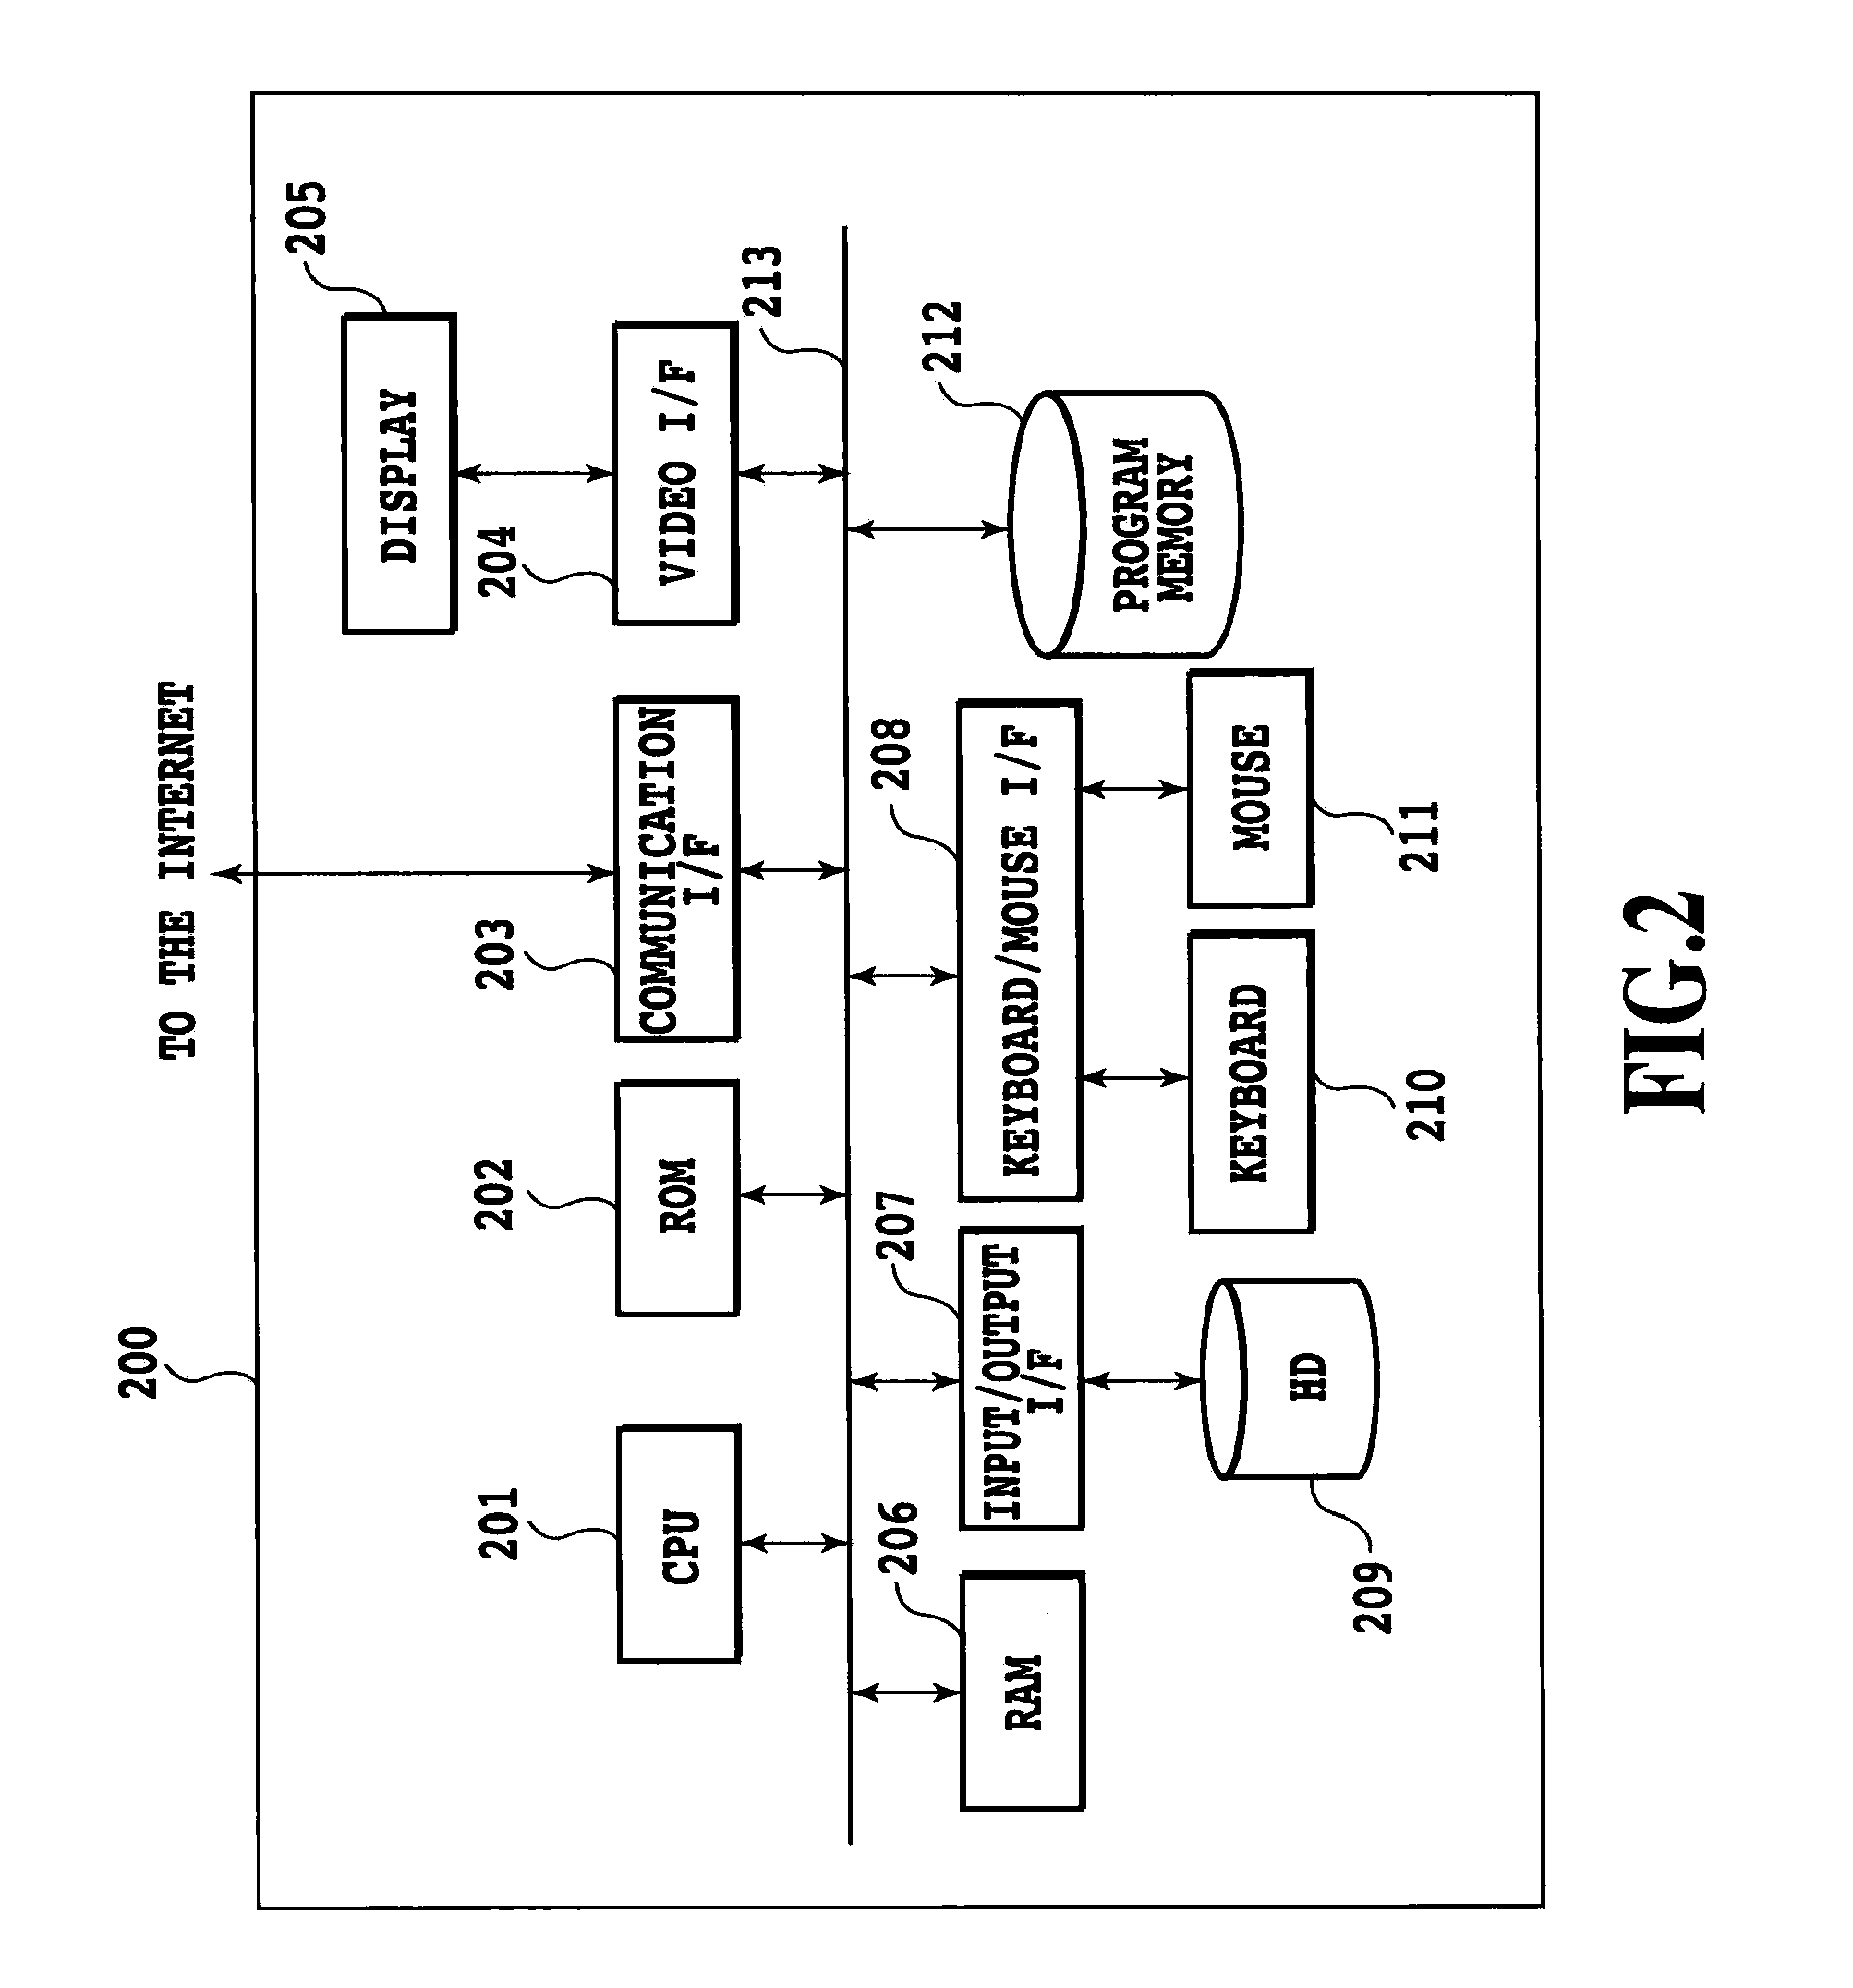 Visual cabinet system for data display method using its system